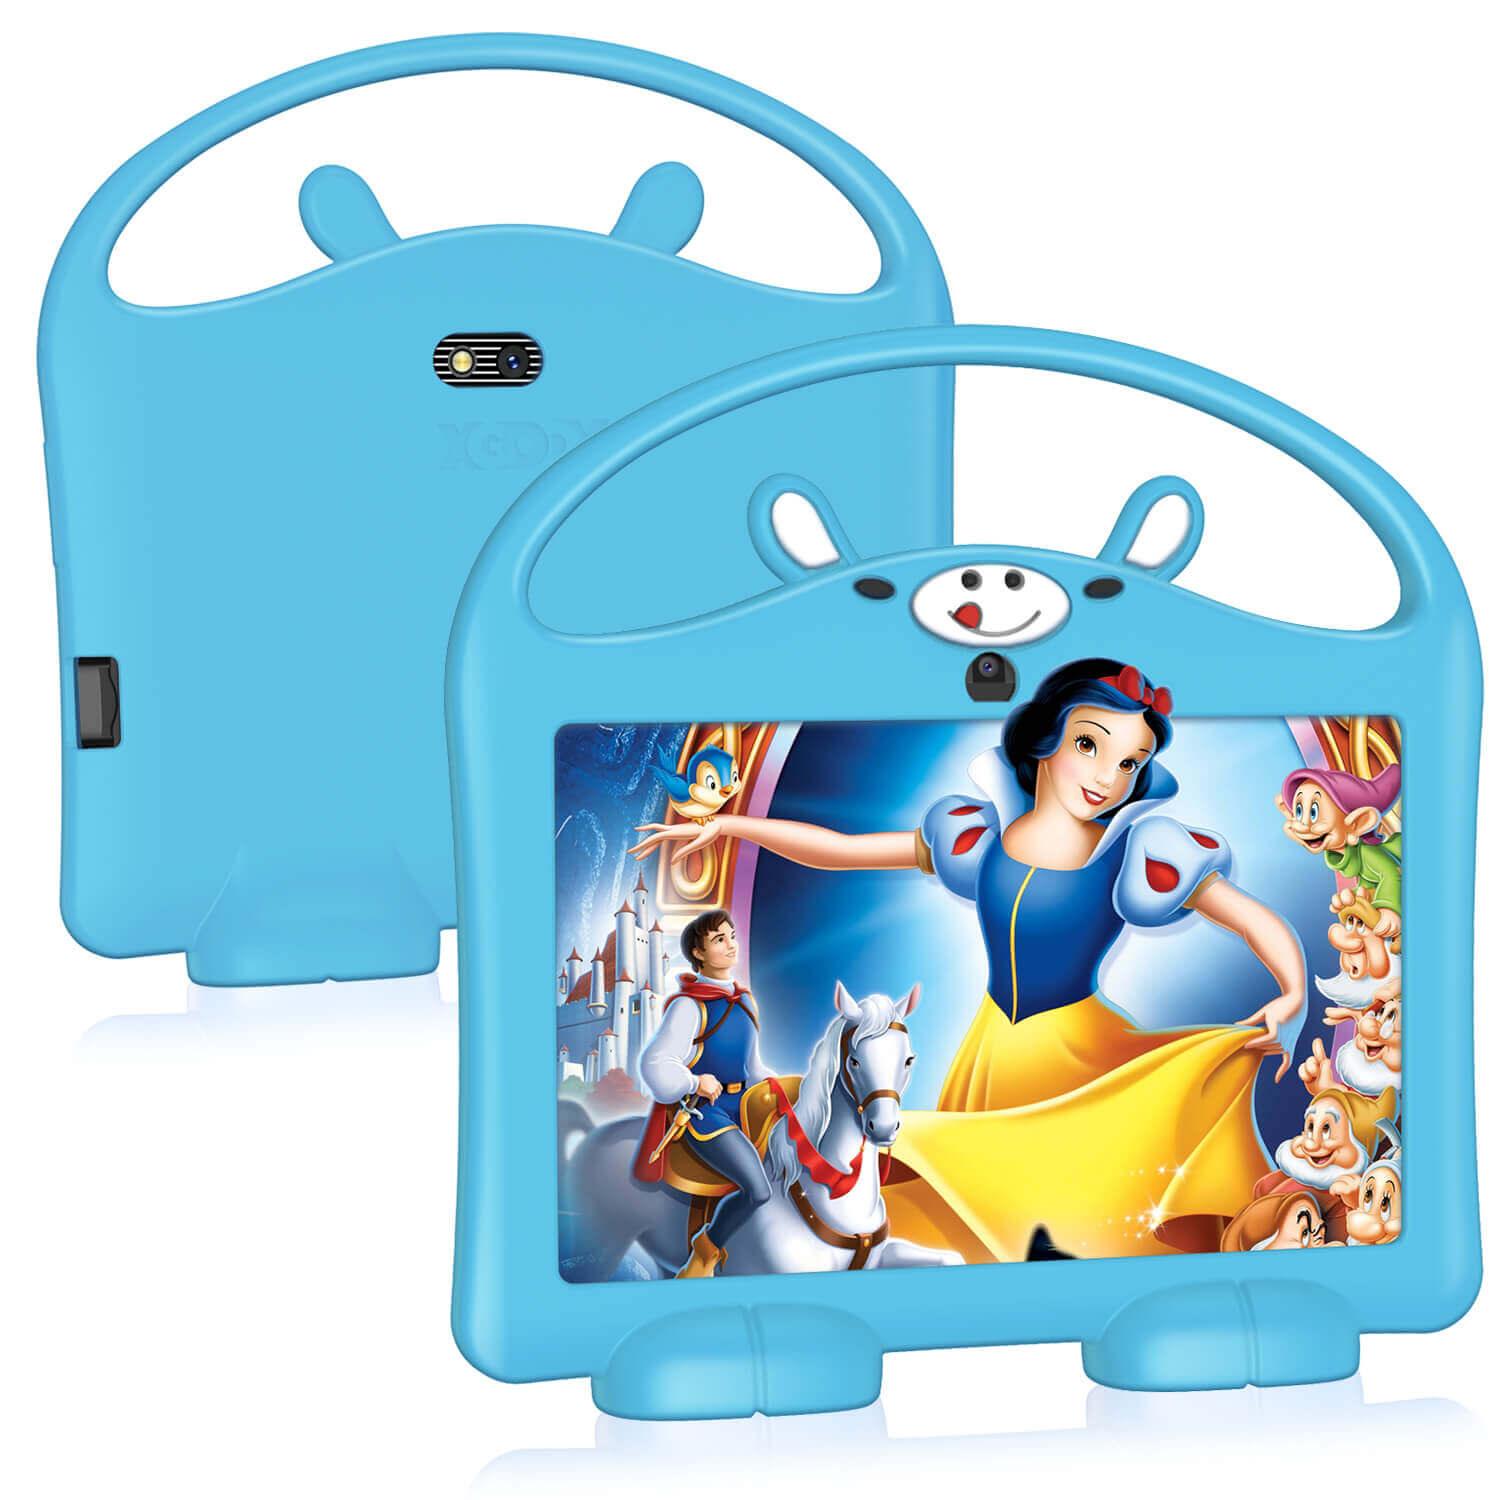 Cost-effective and Most worthwhile XGODY T702 PRO 7 Inch 32GB Android 11.0 OS Children's Tablets PC Handheld Cartoon Leather Case - XGODY 